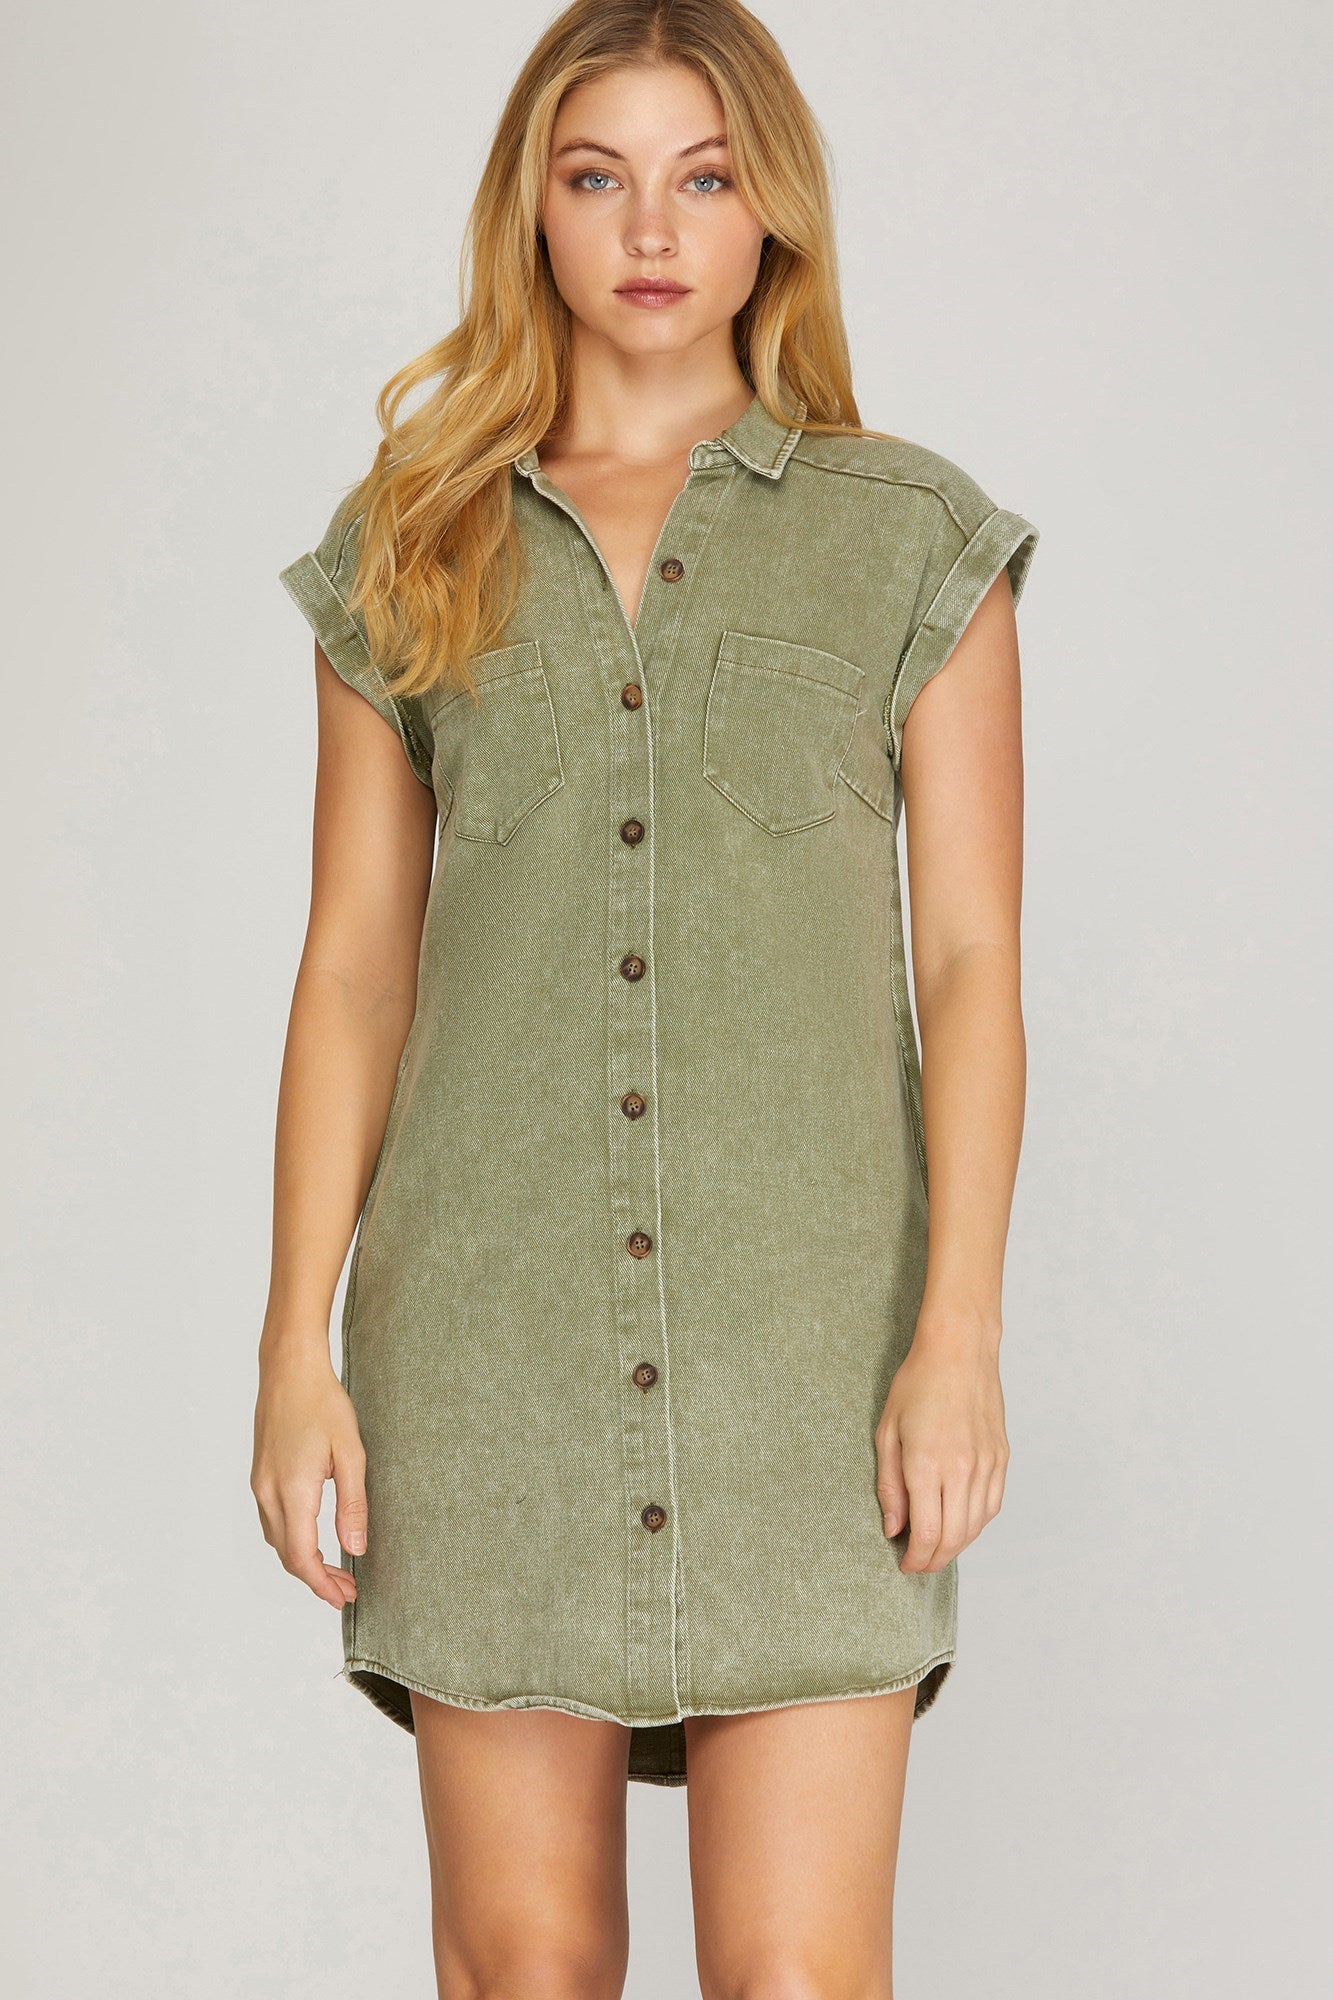 SIDE HUSTLE BUTTON DOWN TWILL SHIRT DRESS IN OLIVE-Dresses-MODE-Couture-Boutique-Womens-Clothing